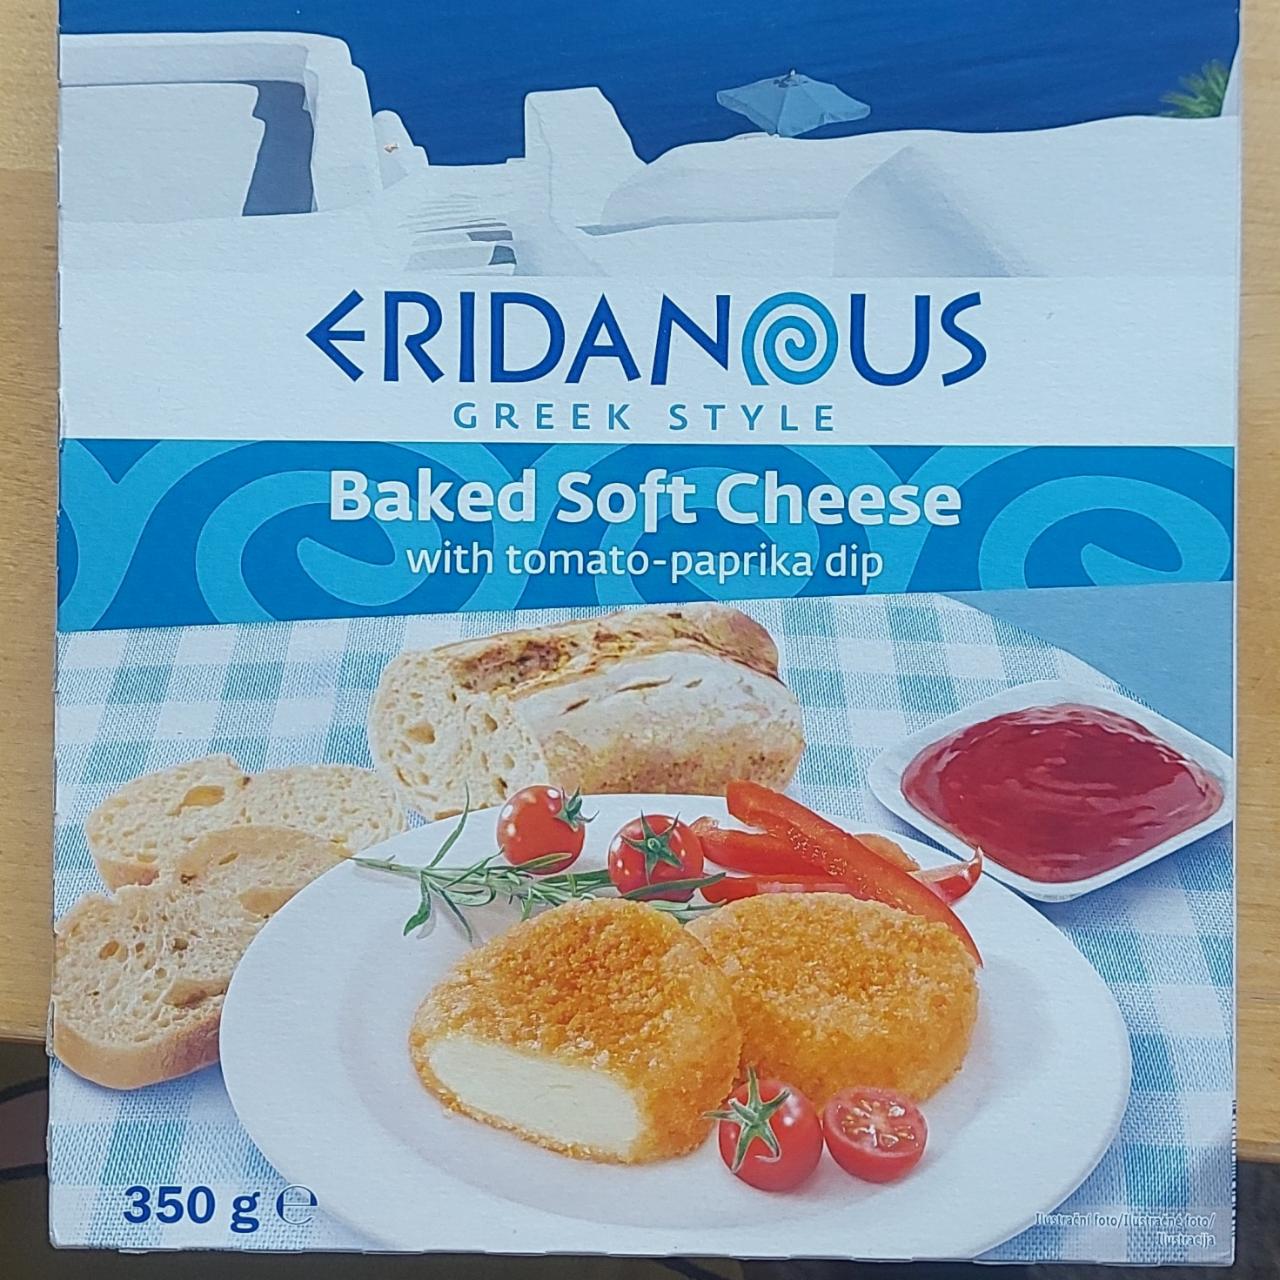 Fotografie - Baked Soft Cheese with Tomato-Paprika dip Eridanous